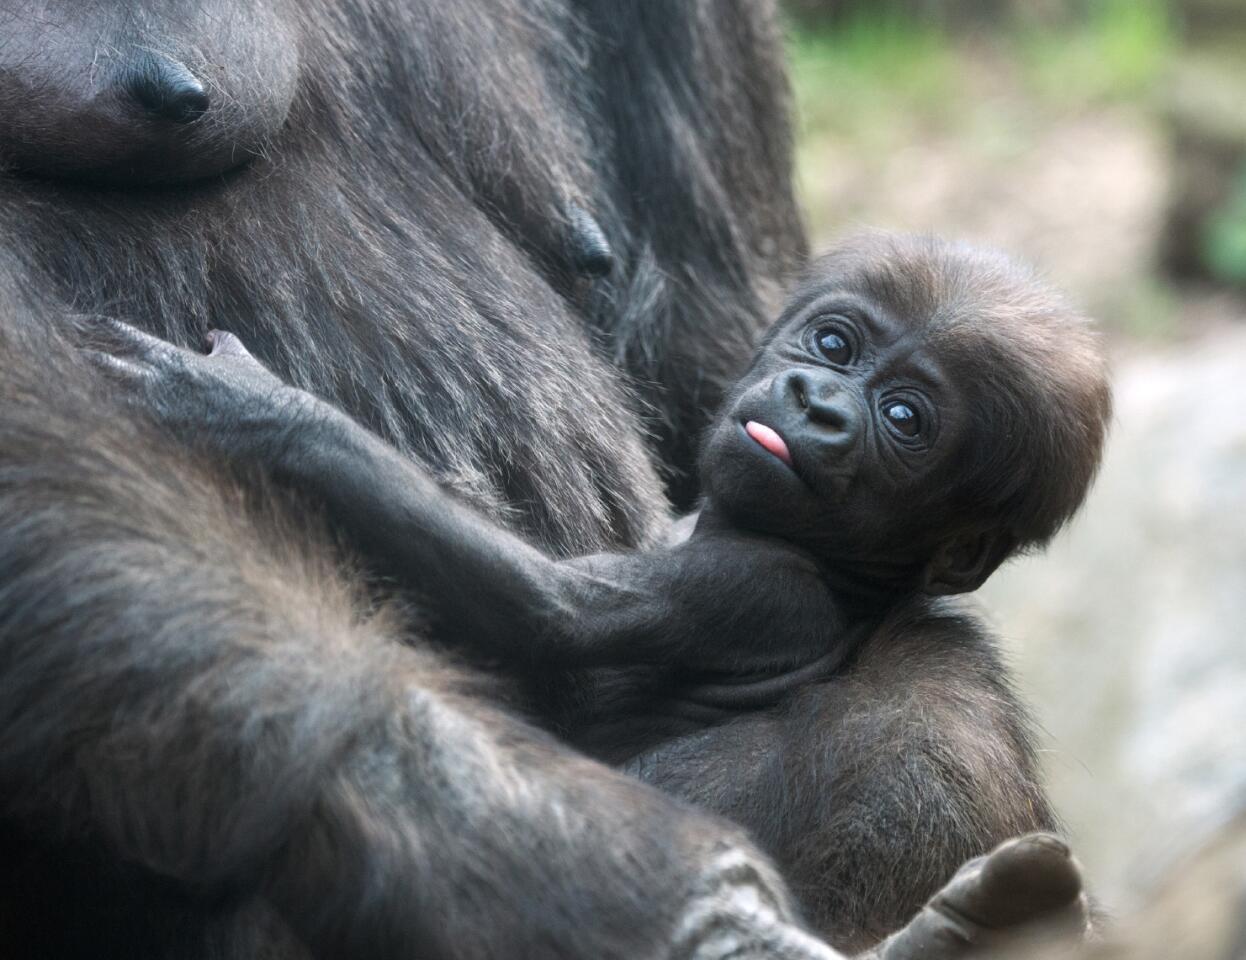 A Western lowland gorilla baby clings to her mother at the Bronx Zoo in New York on April 11.